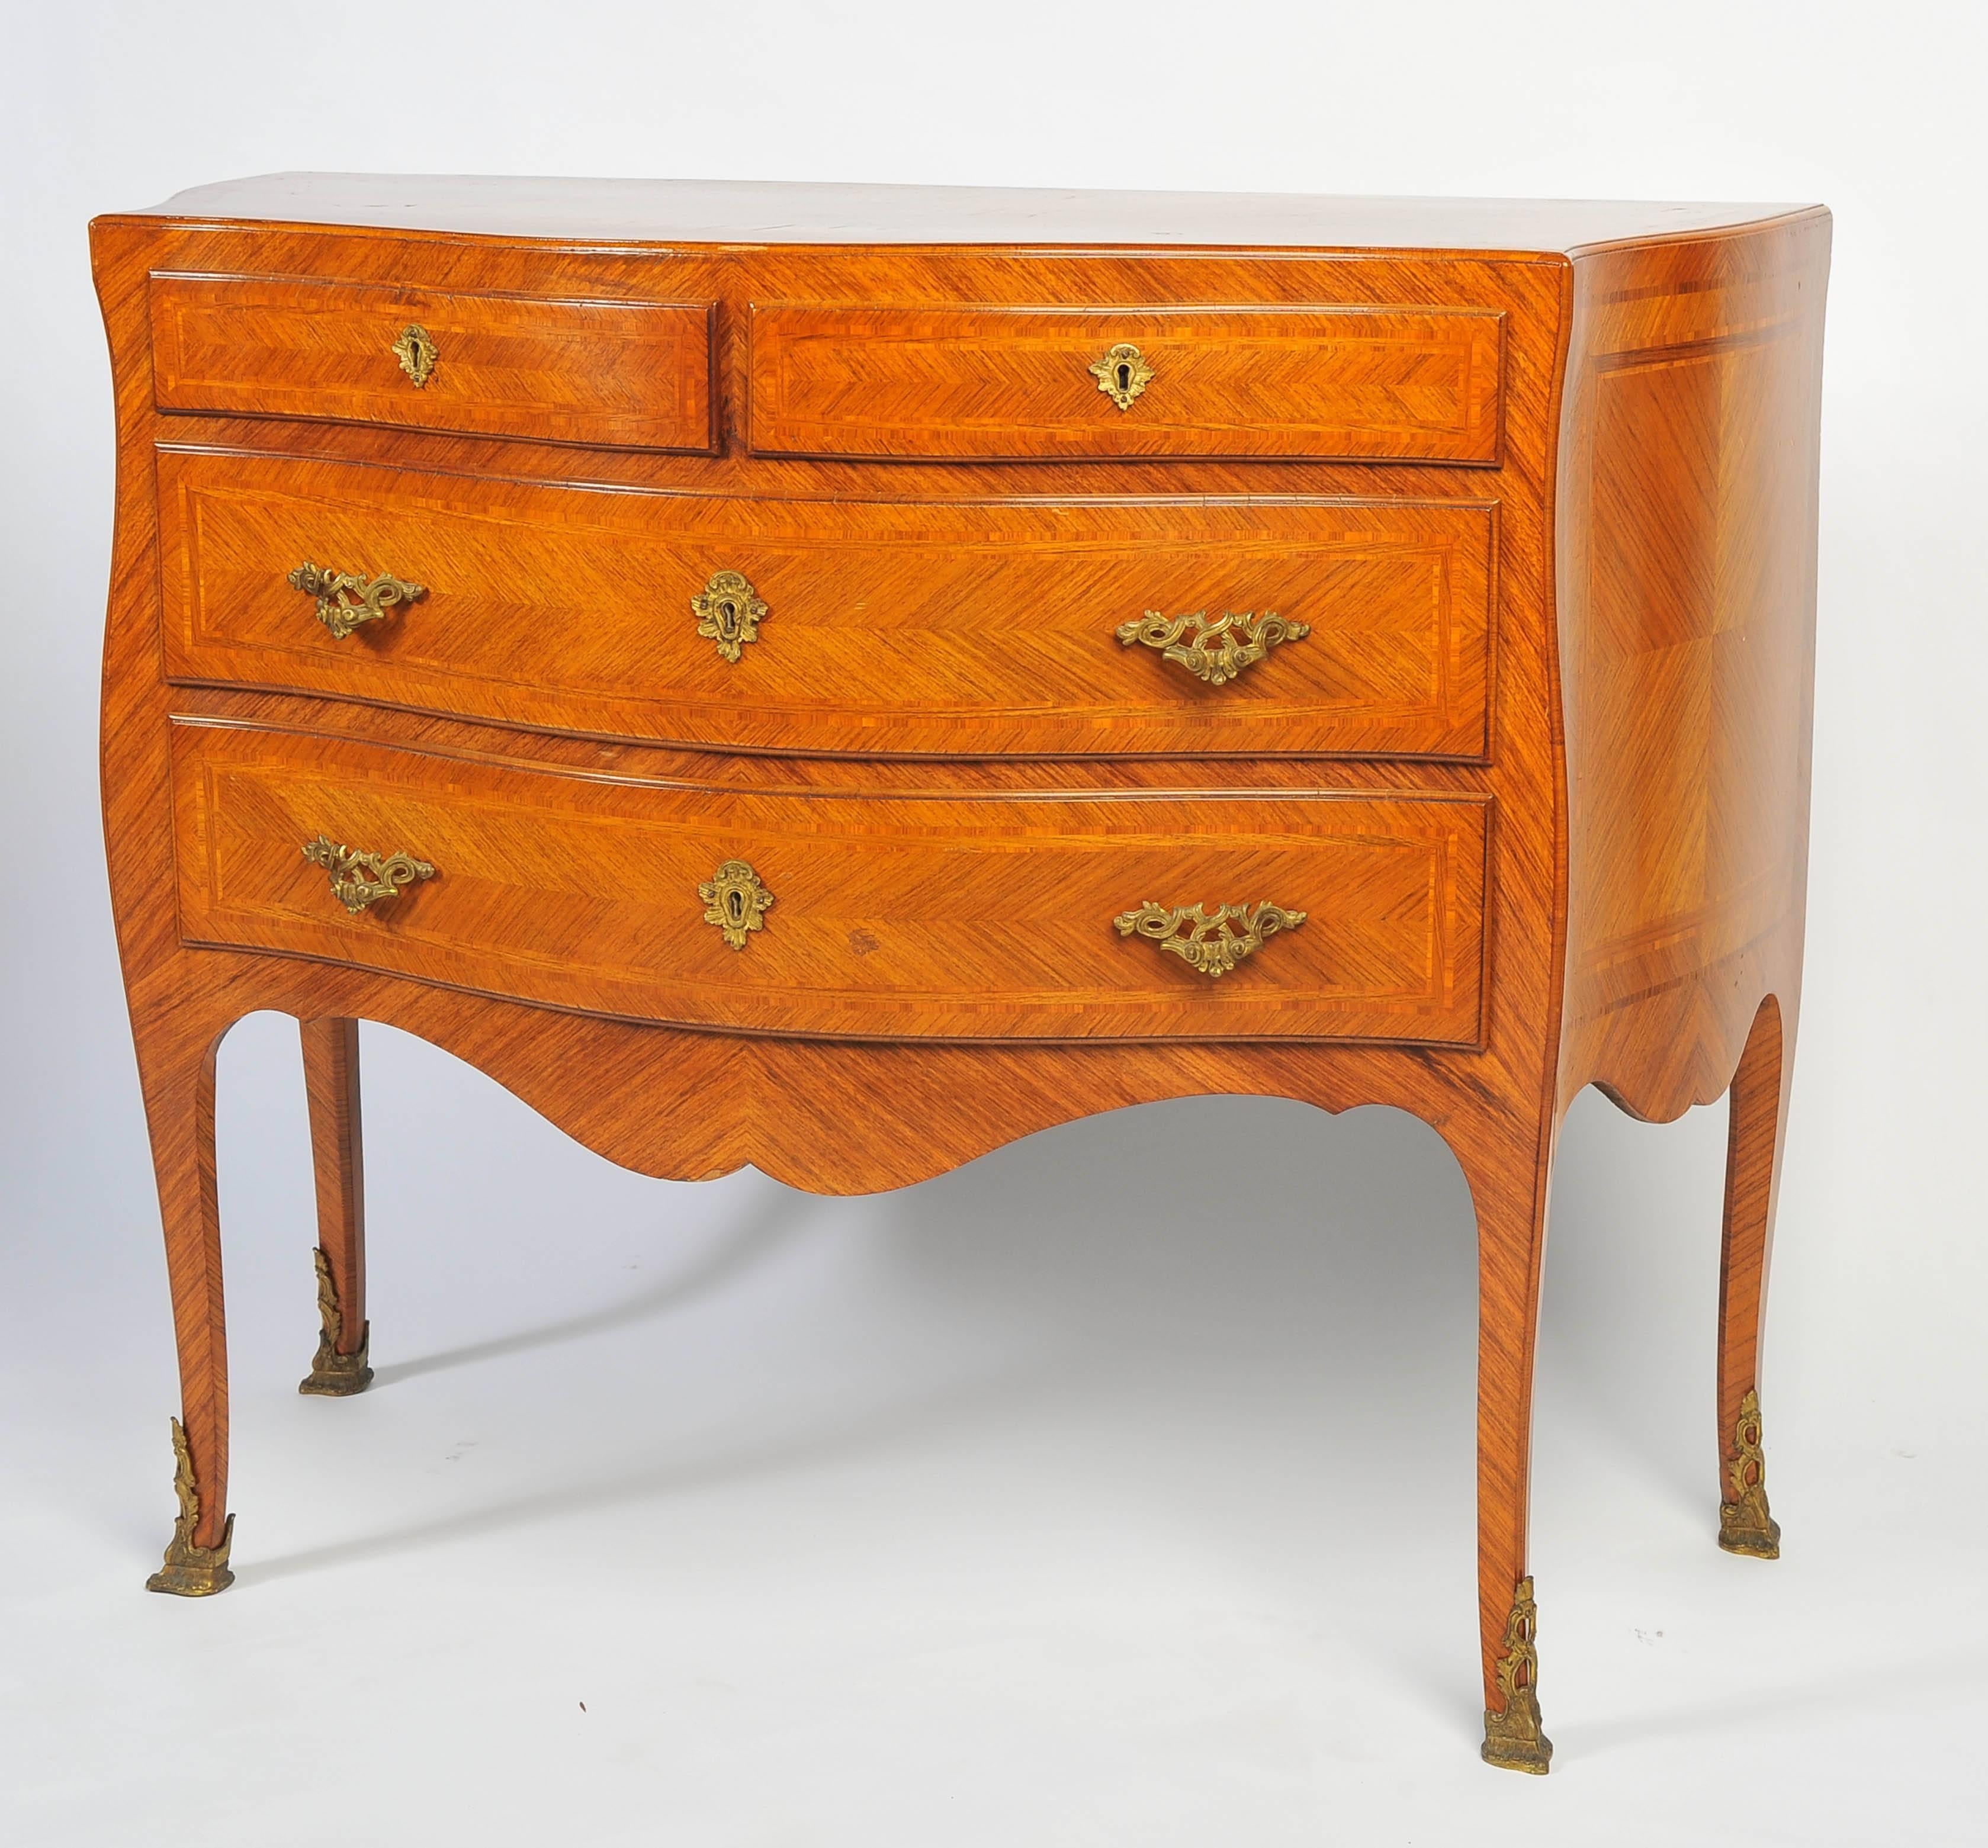 A good quality pair of French Louis XV style kingwood veneered serpentine fronted commodes, the top having crossbanding and quartered veneers, two short and two long drawers each with crossbanding and quartered veneers to match. Beneath the drawers